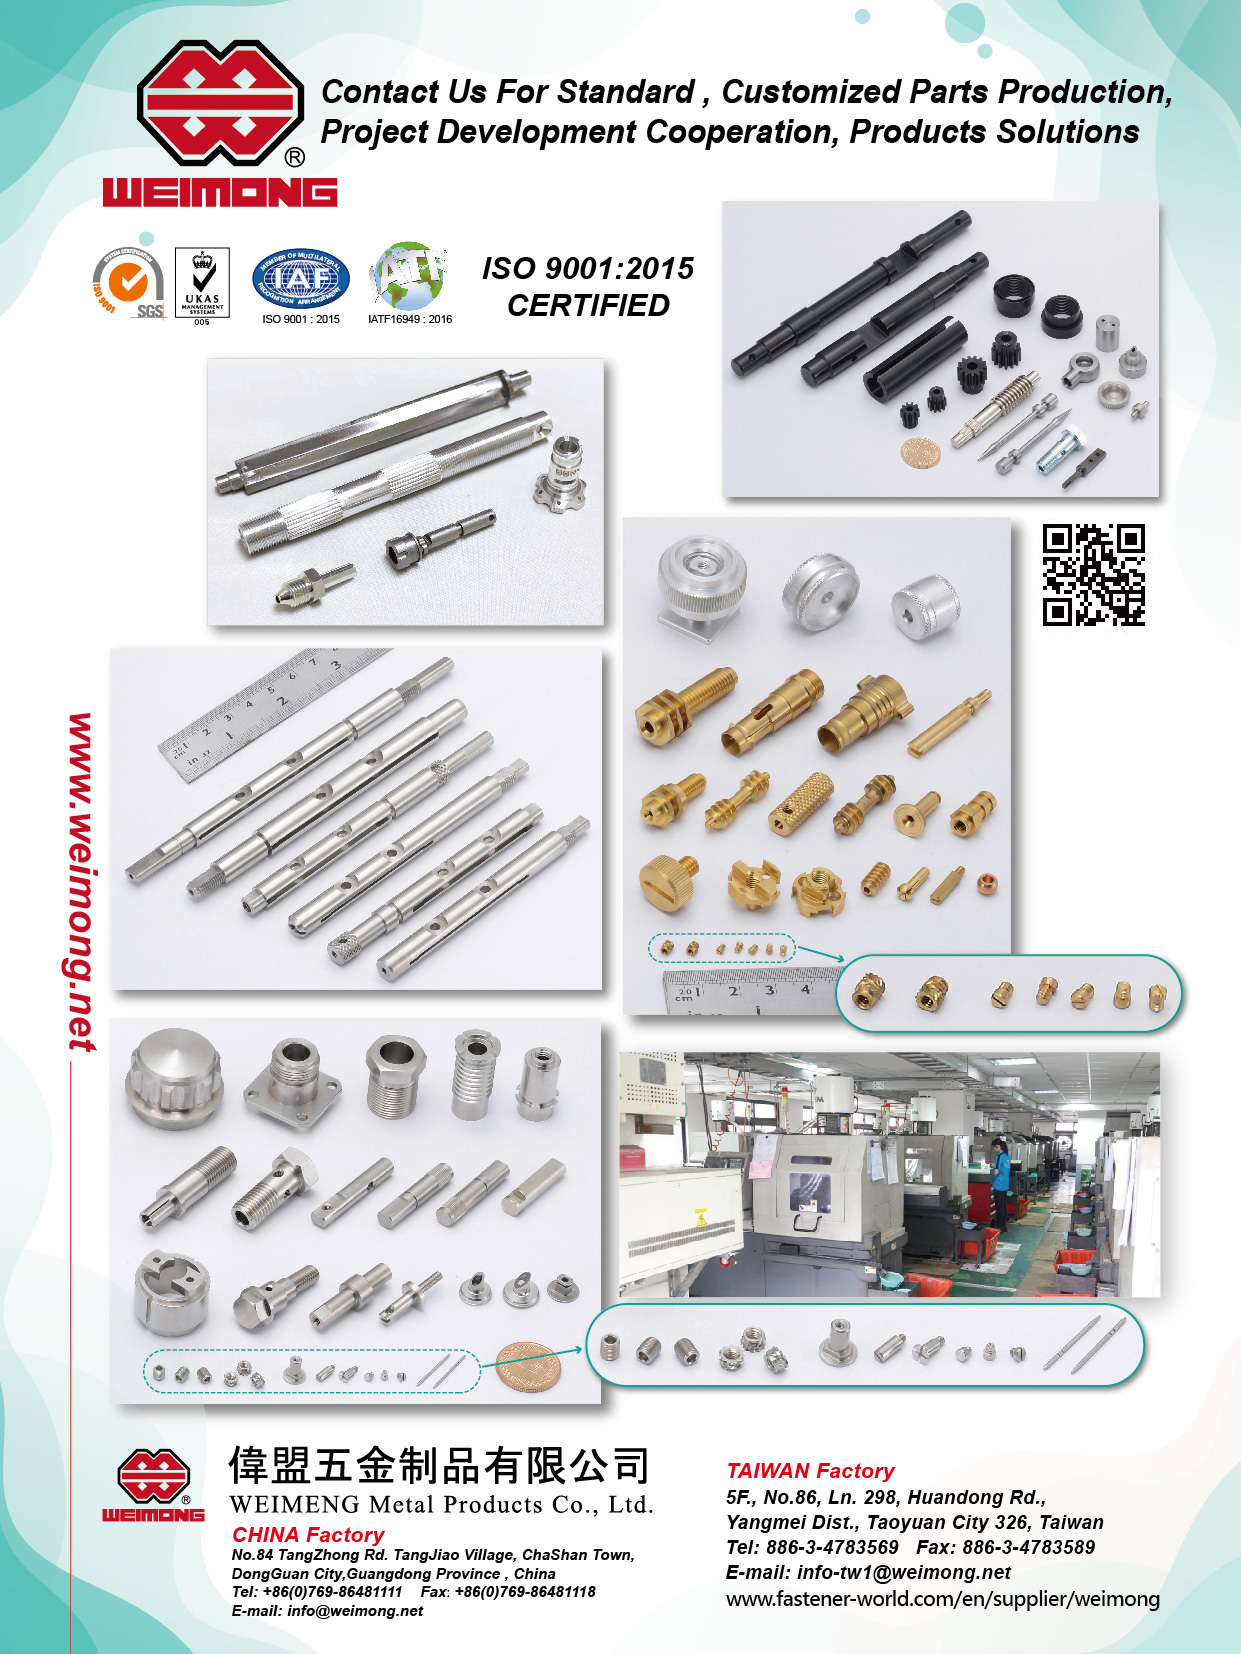 WEIMENG METAL PRODUCTS CO., LTD. , Machining Parts, Cold Forging, Stamping , Semi-tubular Rivets